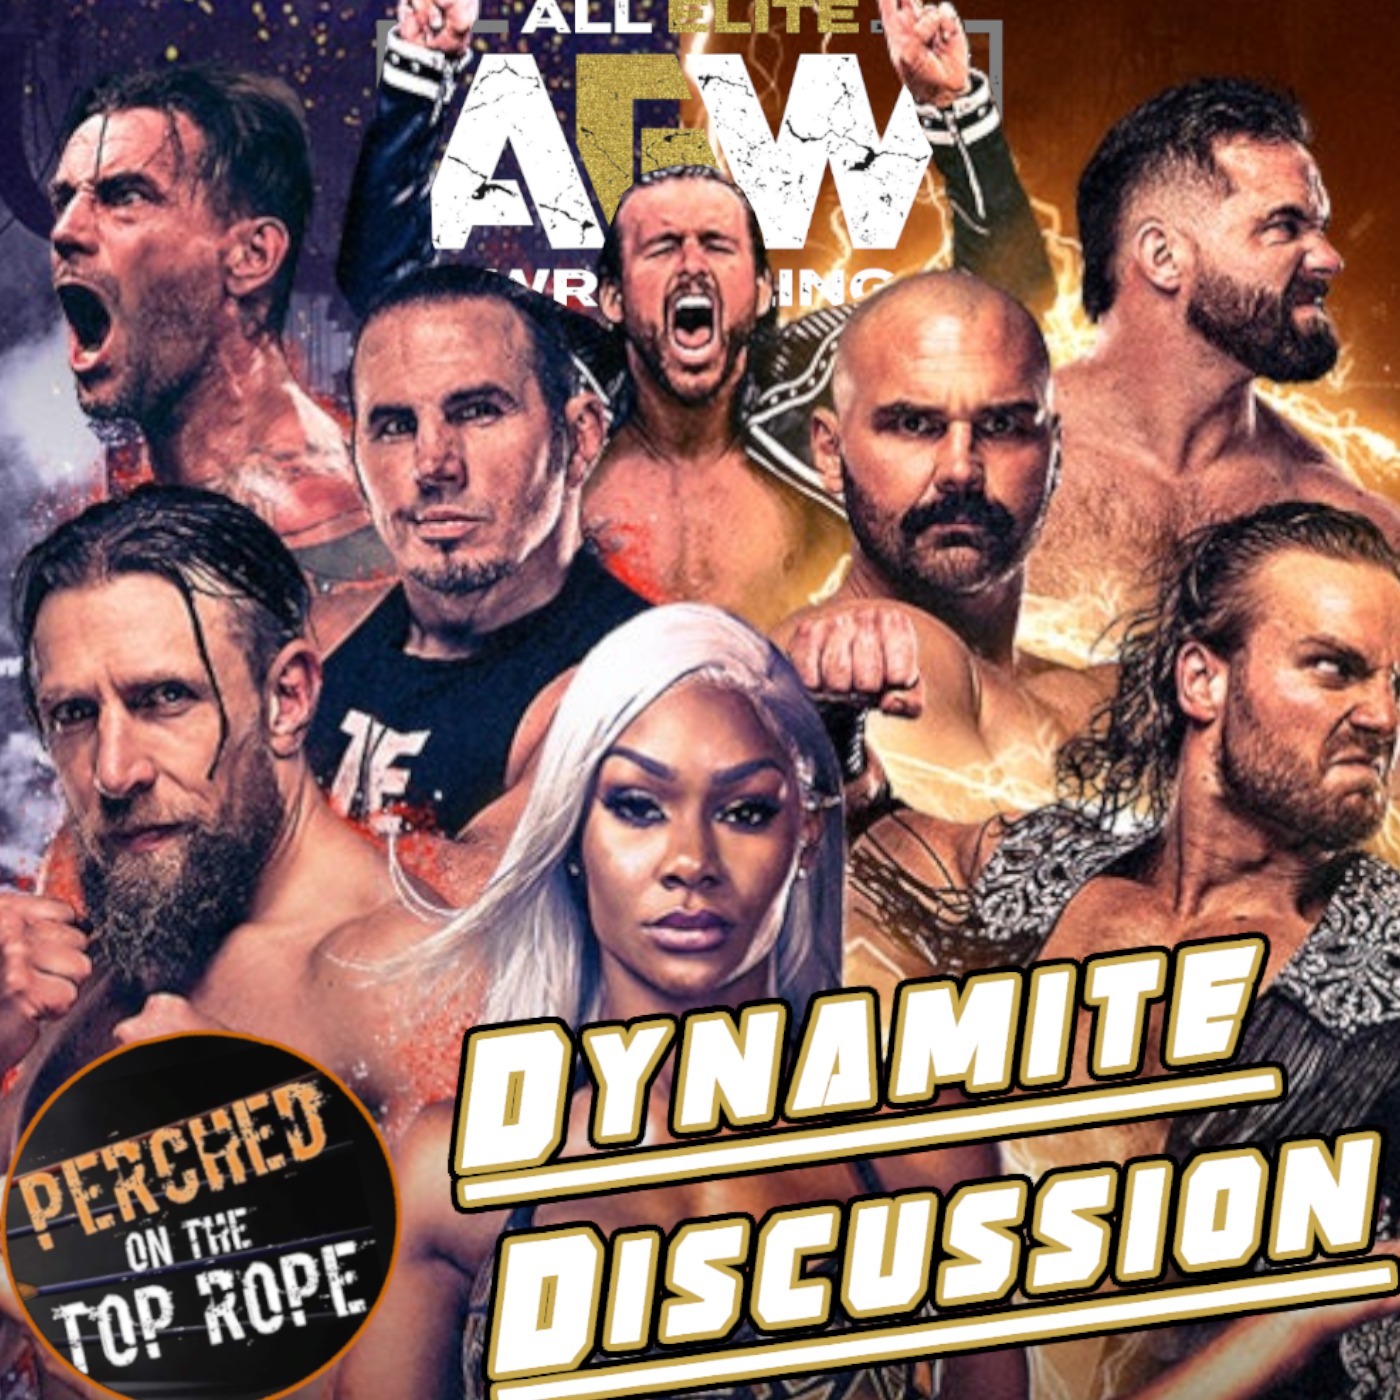 E79: AEW Dynamite Discussion (3-30) Max Caster Raps on Will Smith, Interesting Comments by JR, former WWE NXT UK champion is #ALLELITE and Jeff Hardy Botching